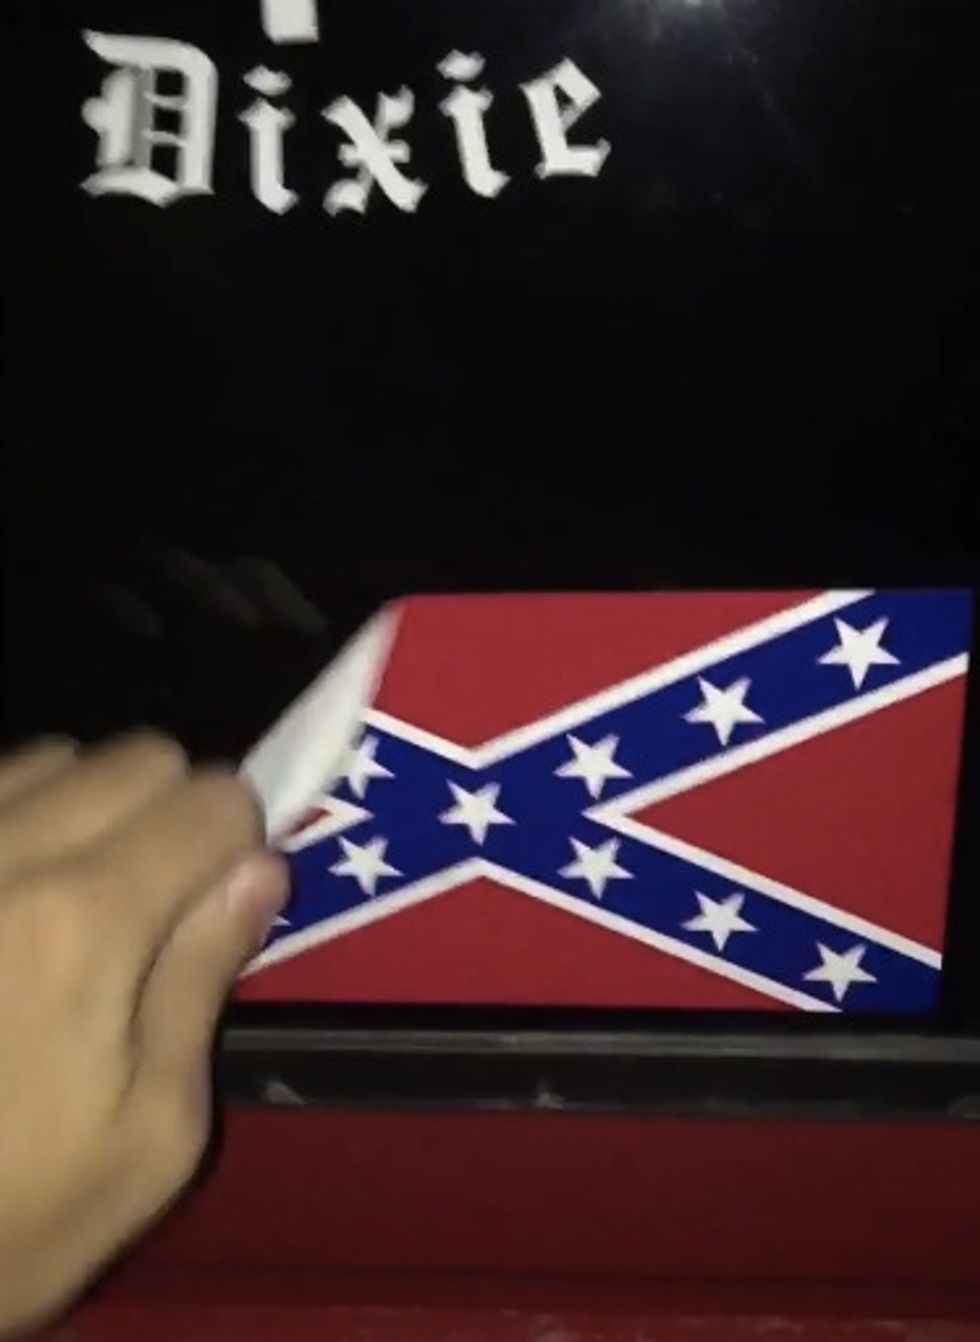 White Advocate for Black Lives Matter Tears Confederate Flag Sticker From Pickup Truck and Replaces It With Something Else